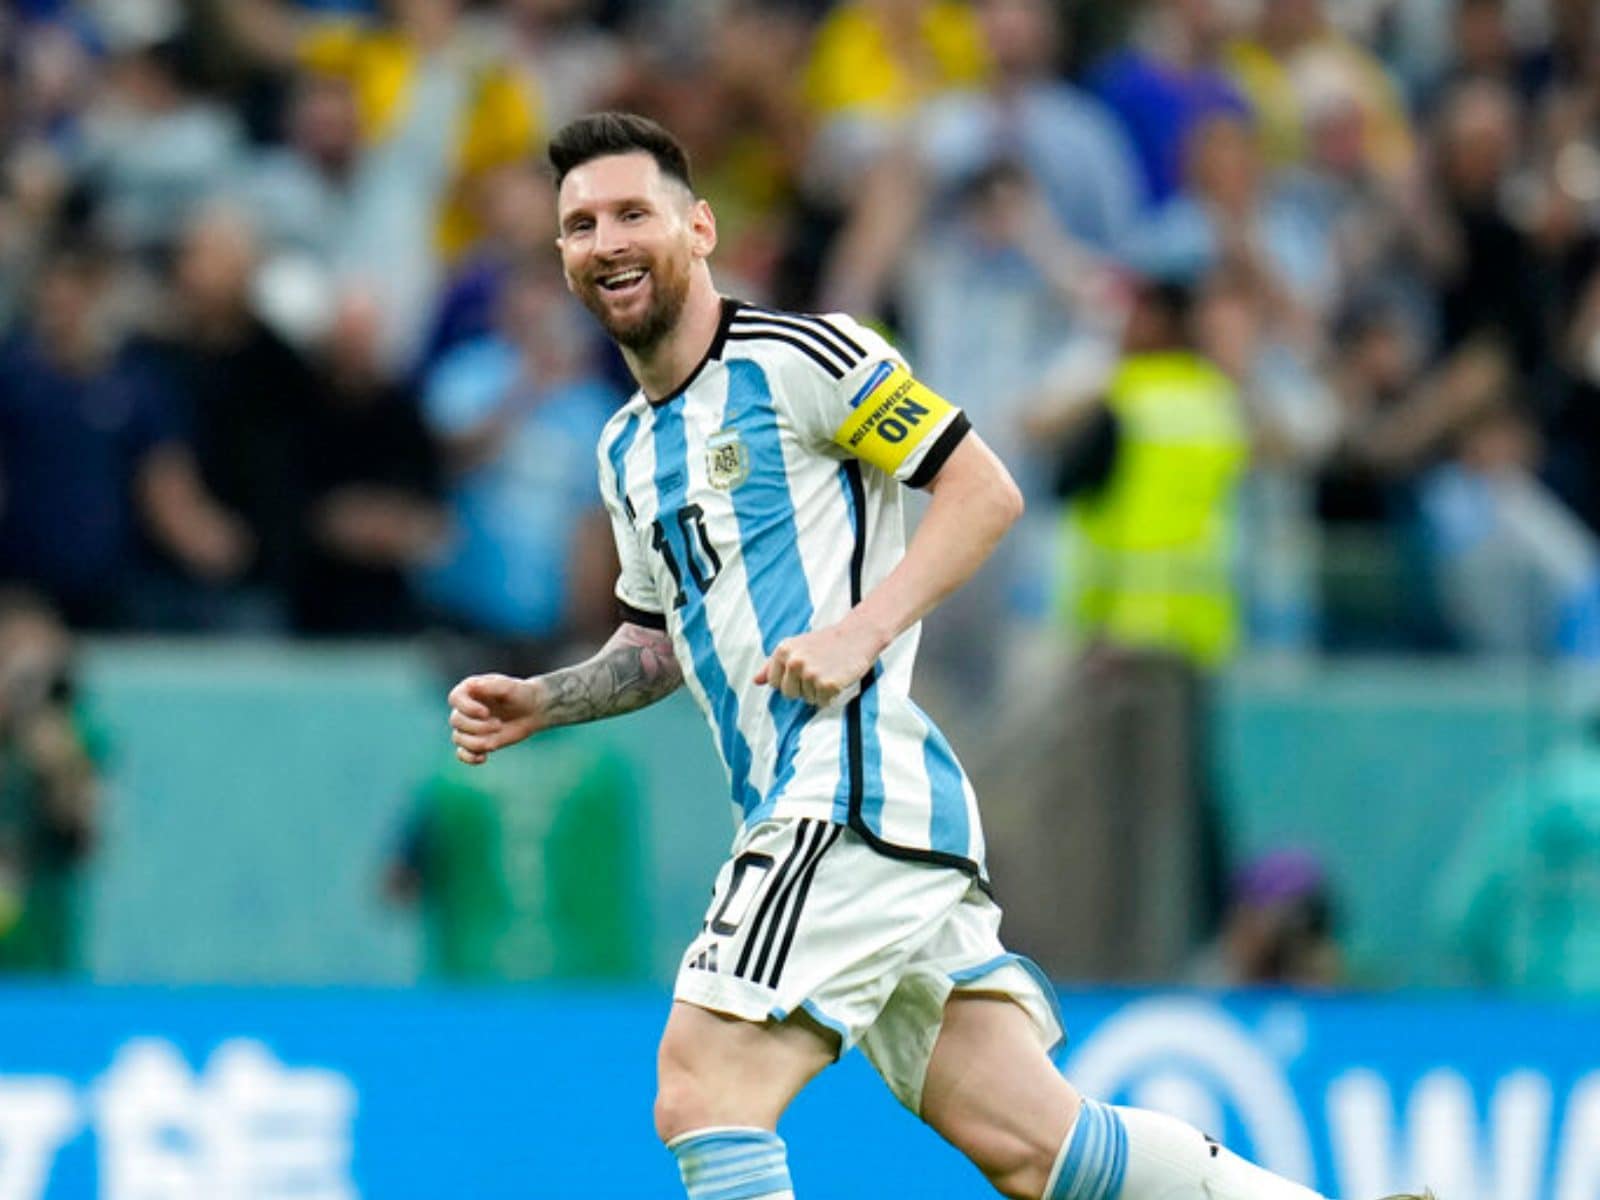 Messi now a step closer to overtaking Pele and Maradona